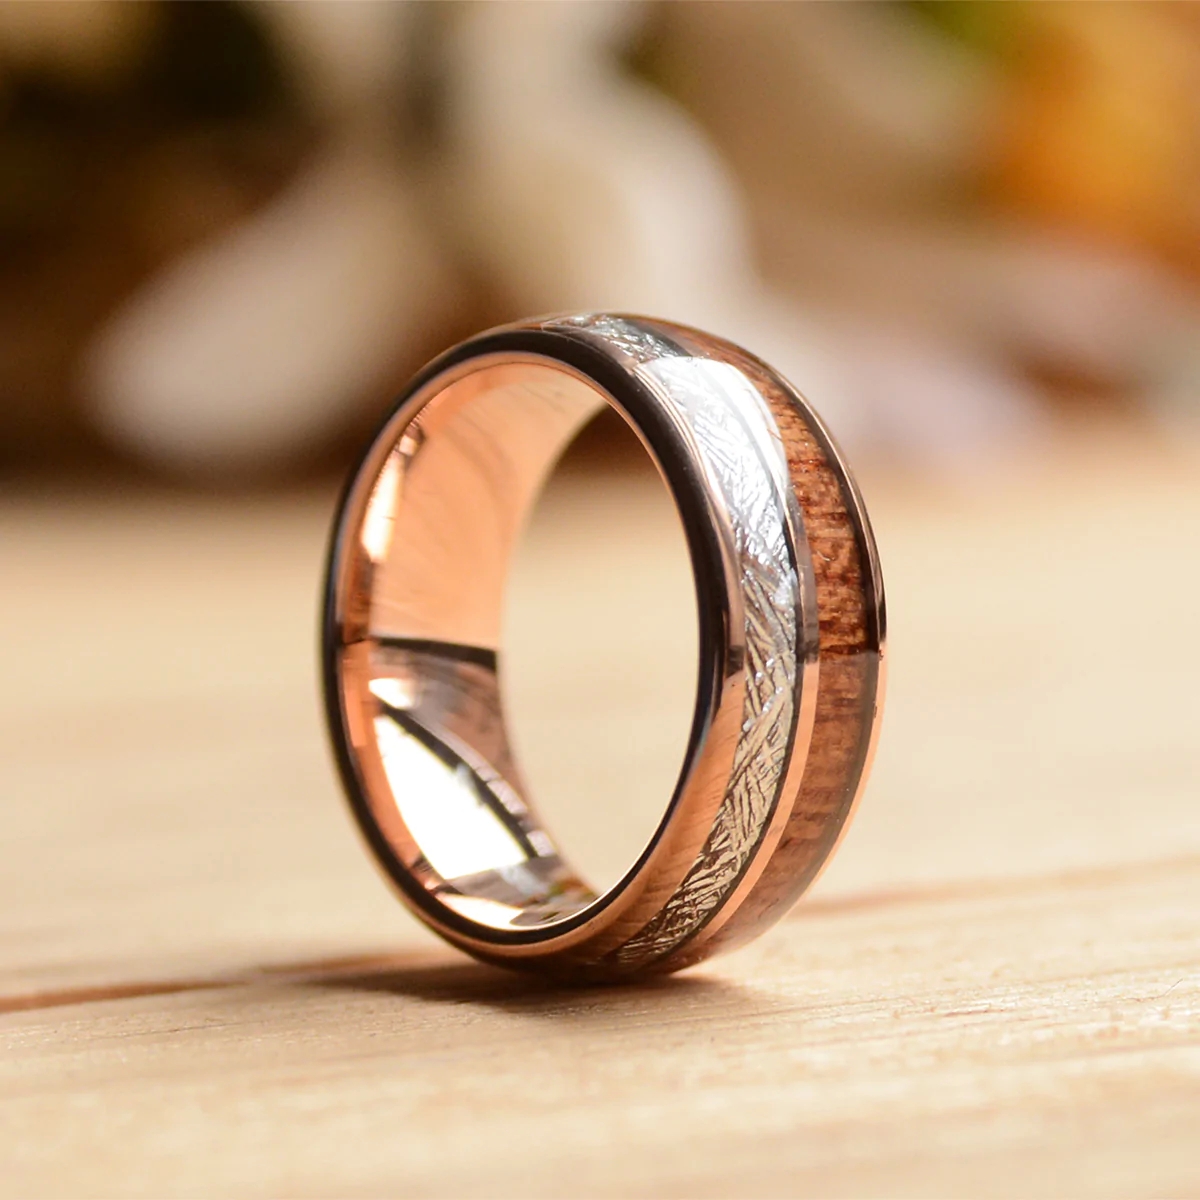 The black wedding bands are things that represent the connection that unites two people post thumbnail image